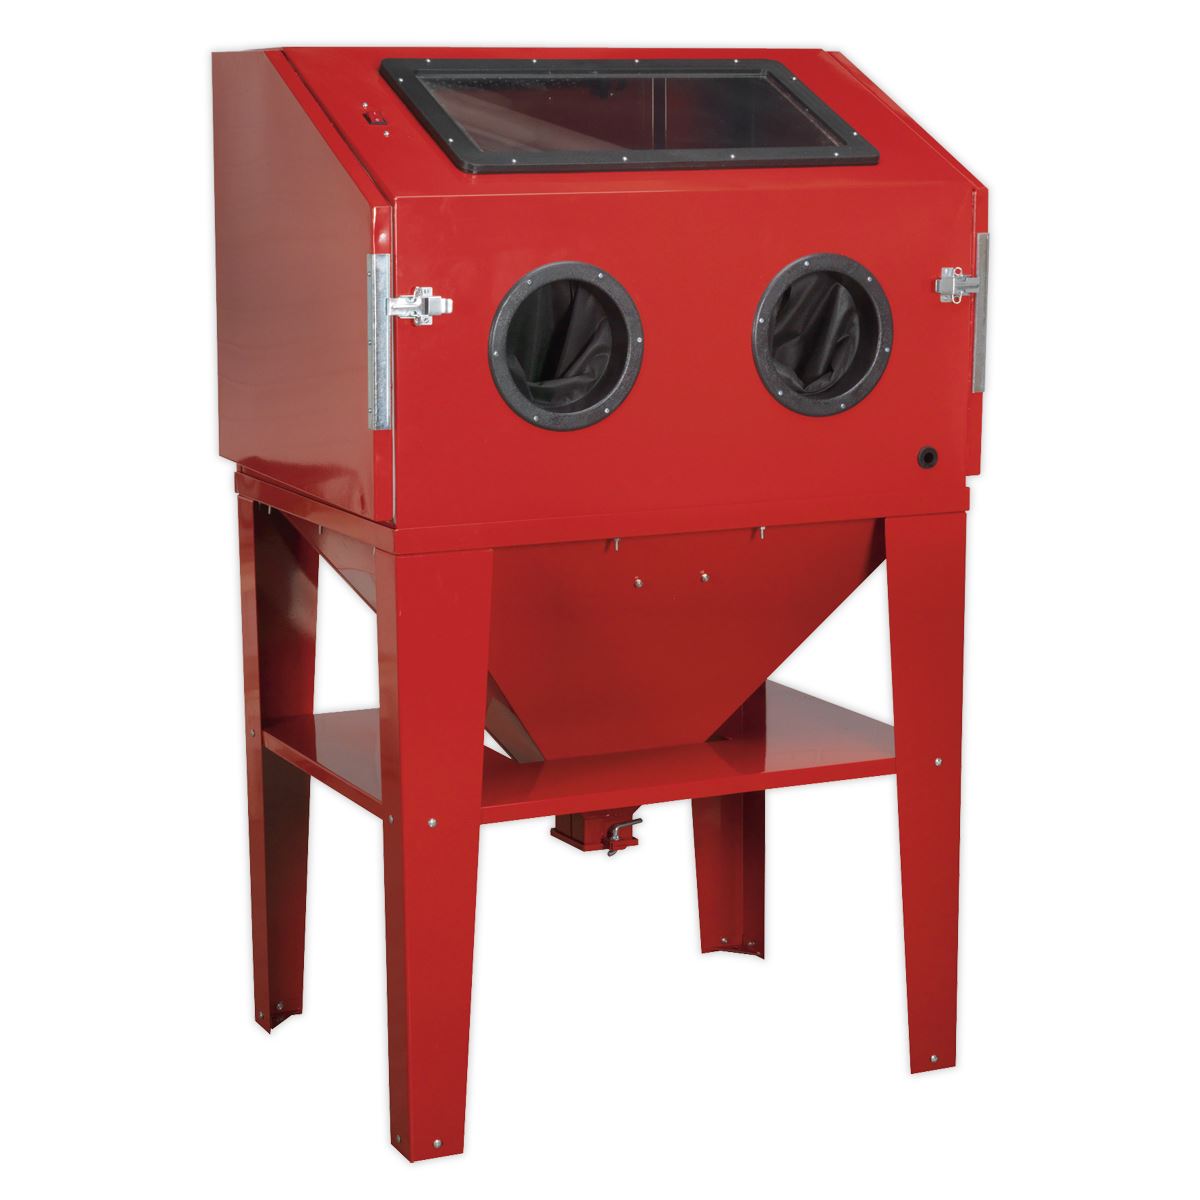 Sealey Shot Blasting Cabinet Double Access 960 x 720 x 1500mm